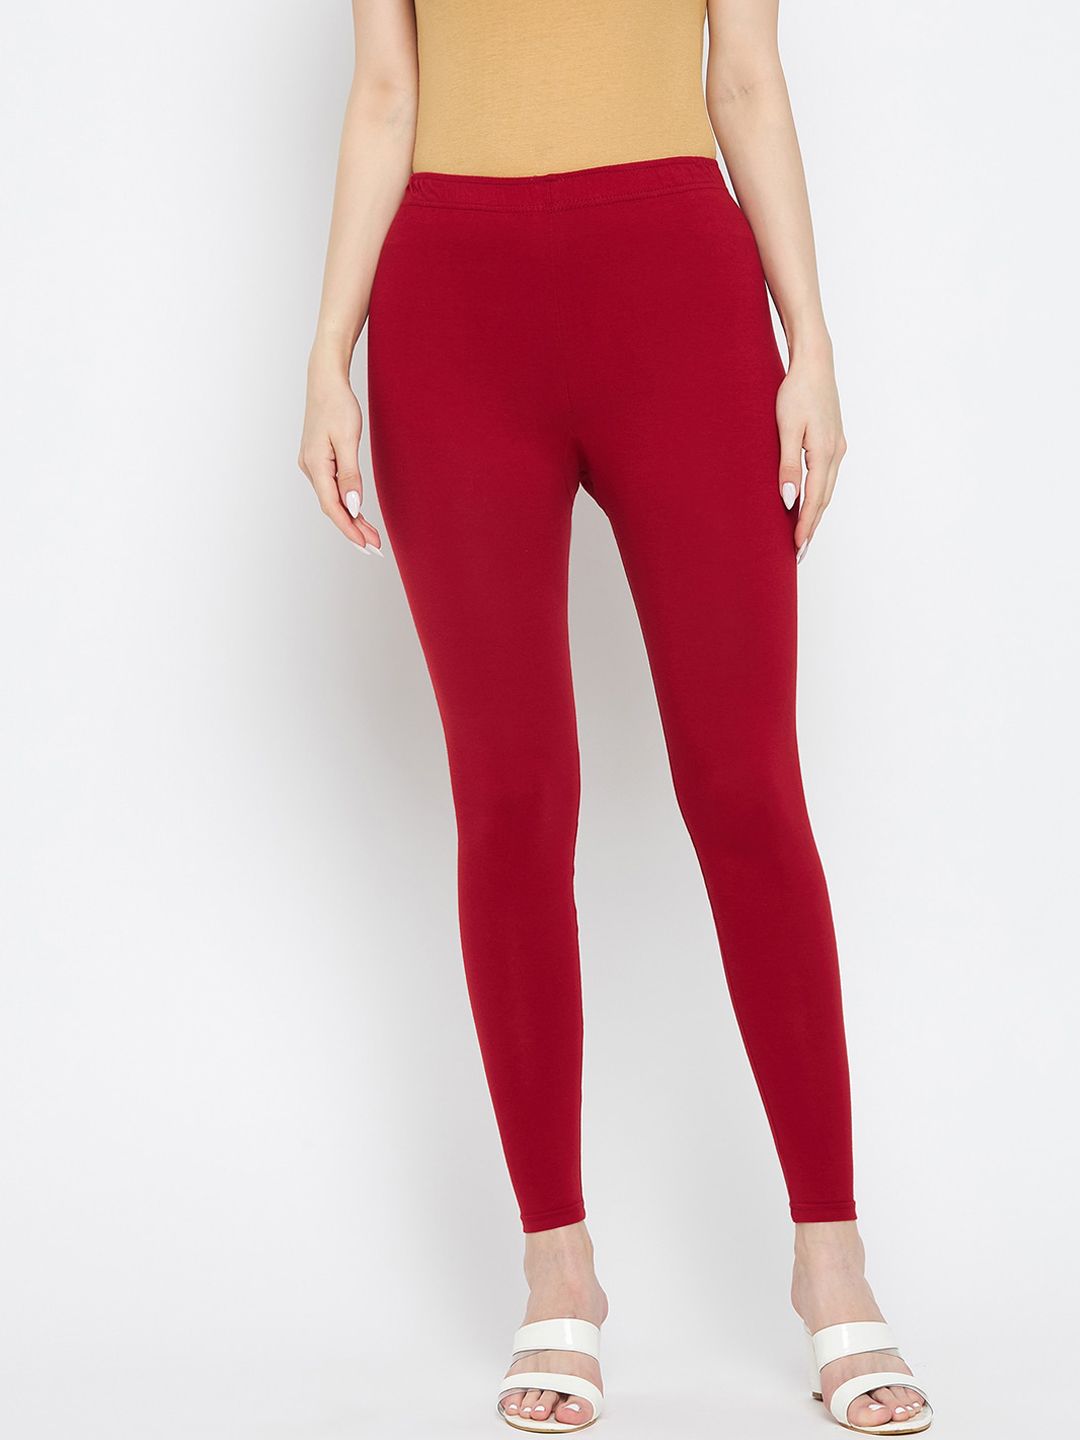 Clora Creation Women Maroon Solid Ankle Length Leggings Price in India